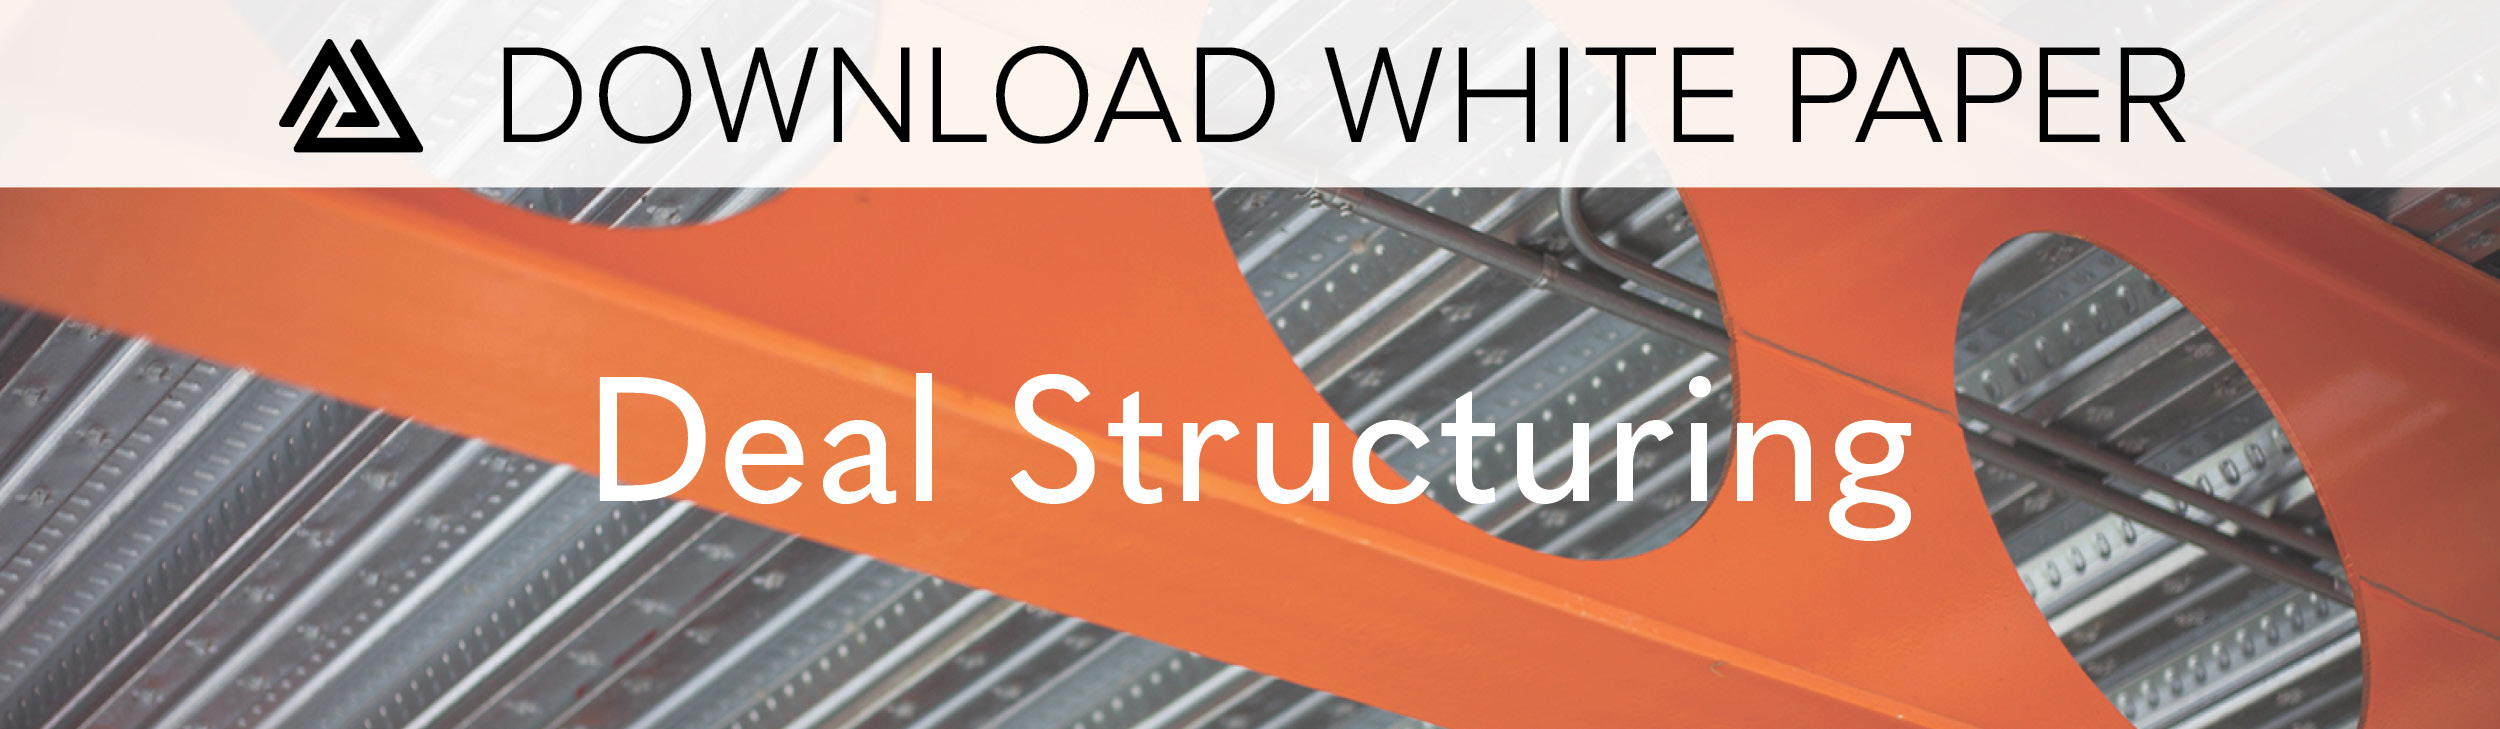 Download Deal Structuring White Paper